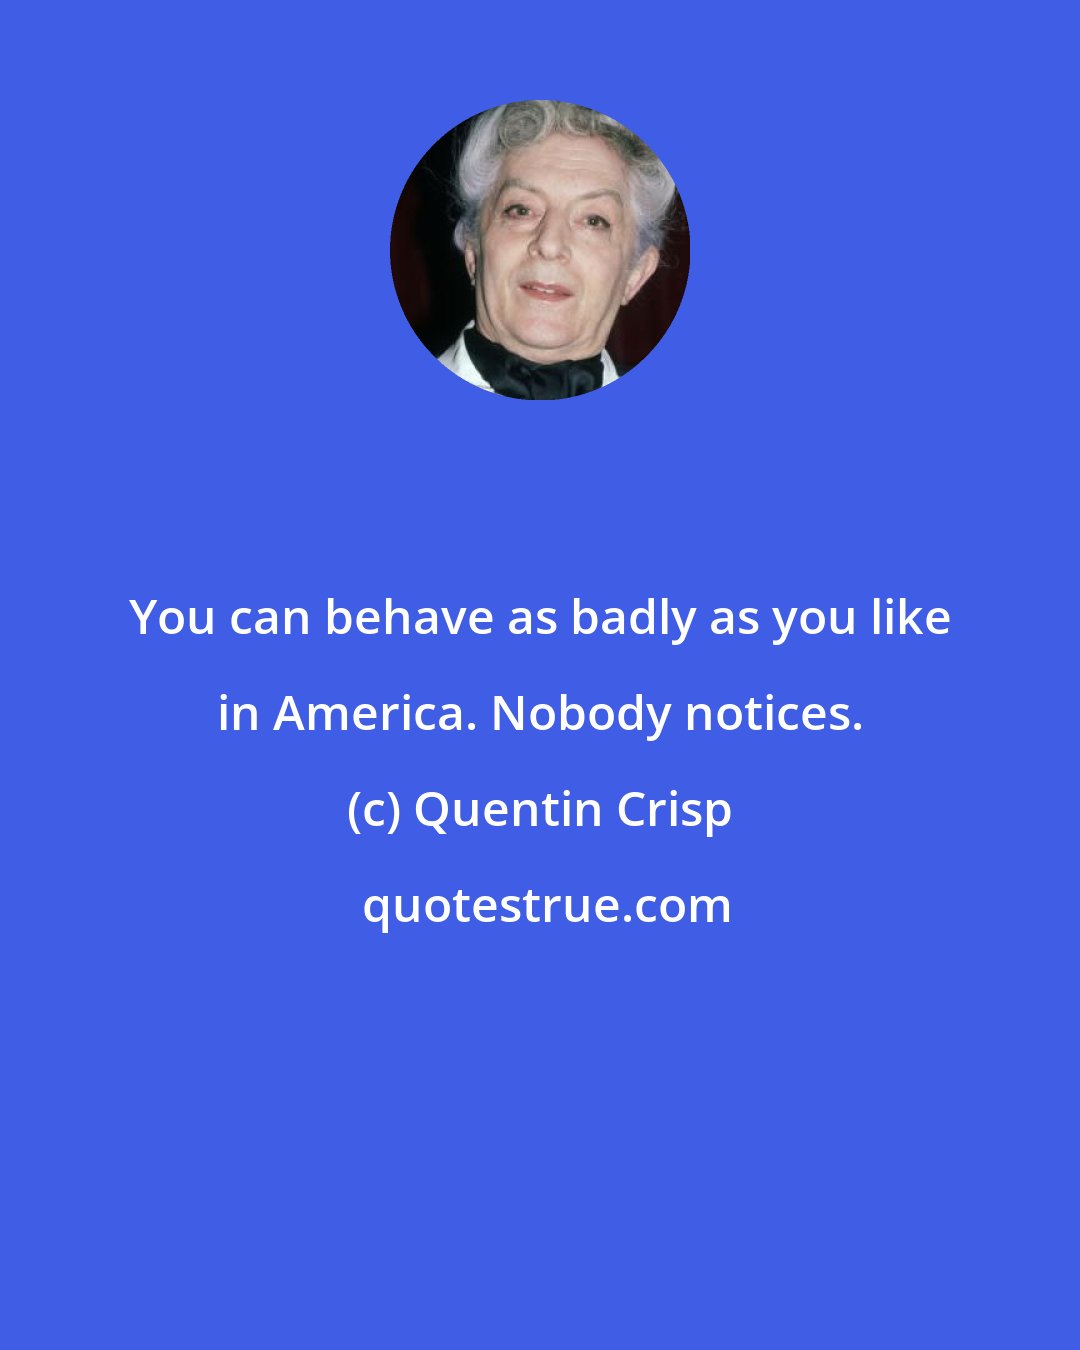 Quentin Crisp: You can behave as badly as you like in America. Nobody notices.